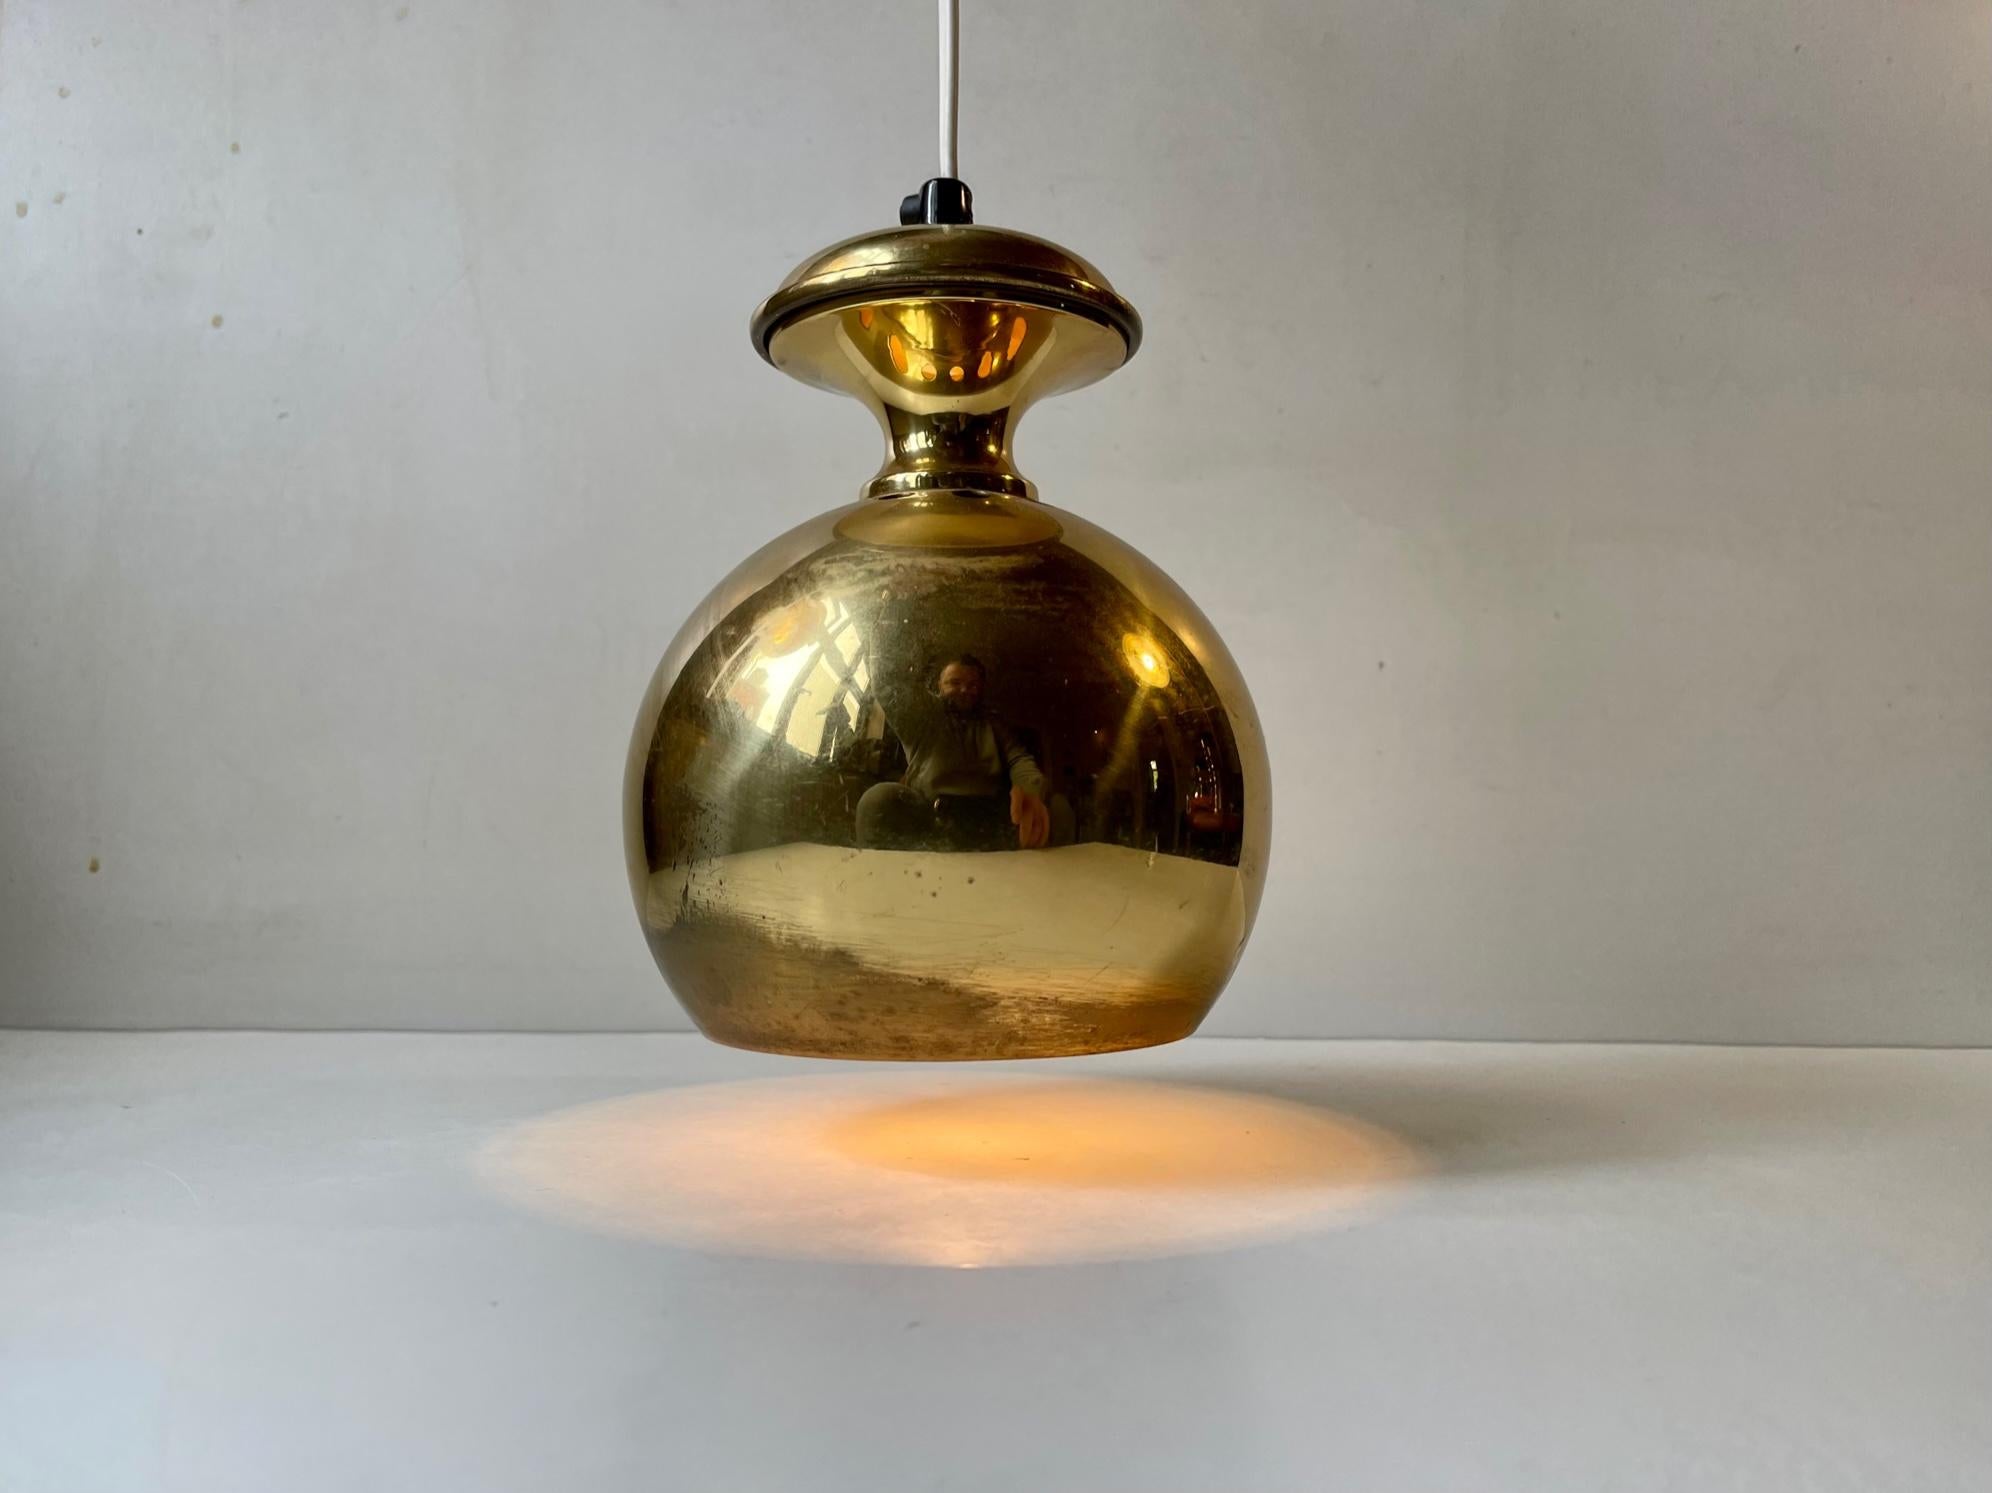 Unusual diablo shaped ball - round - spherical pendant light in brass. Designed and made by ABO Art Metal Studio in Randers, Denmark circa 1970. The style is reminiscent og Hans Agne Jakobsson and Paavo Tynell. Measurements: H: 19 cm, Diameter: 14